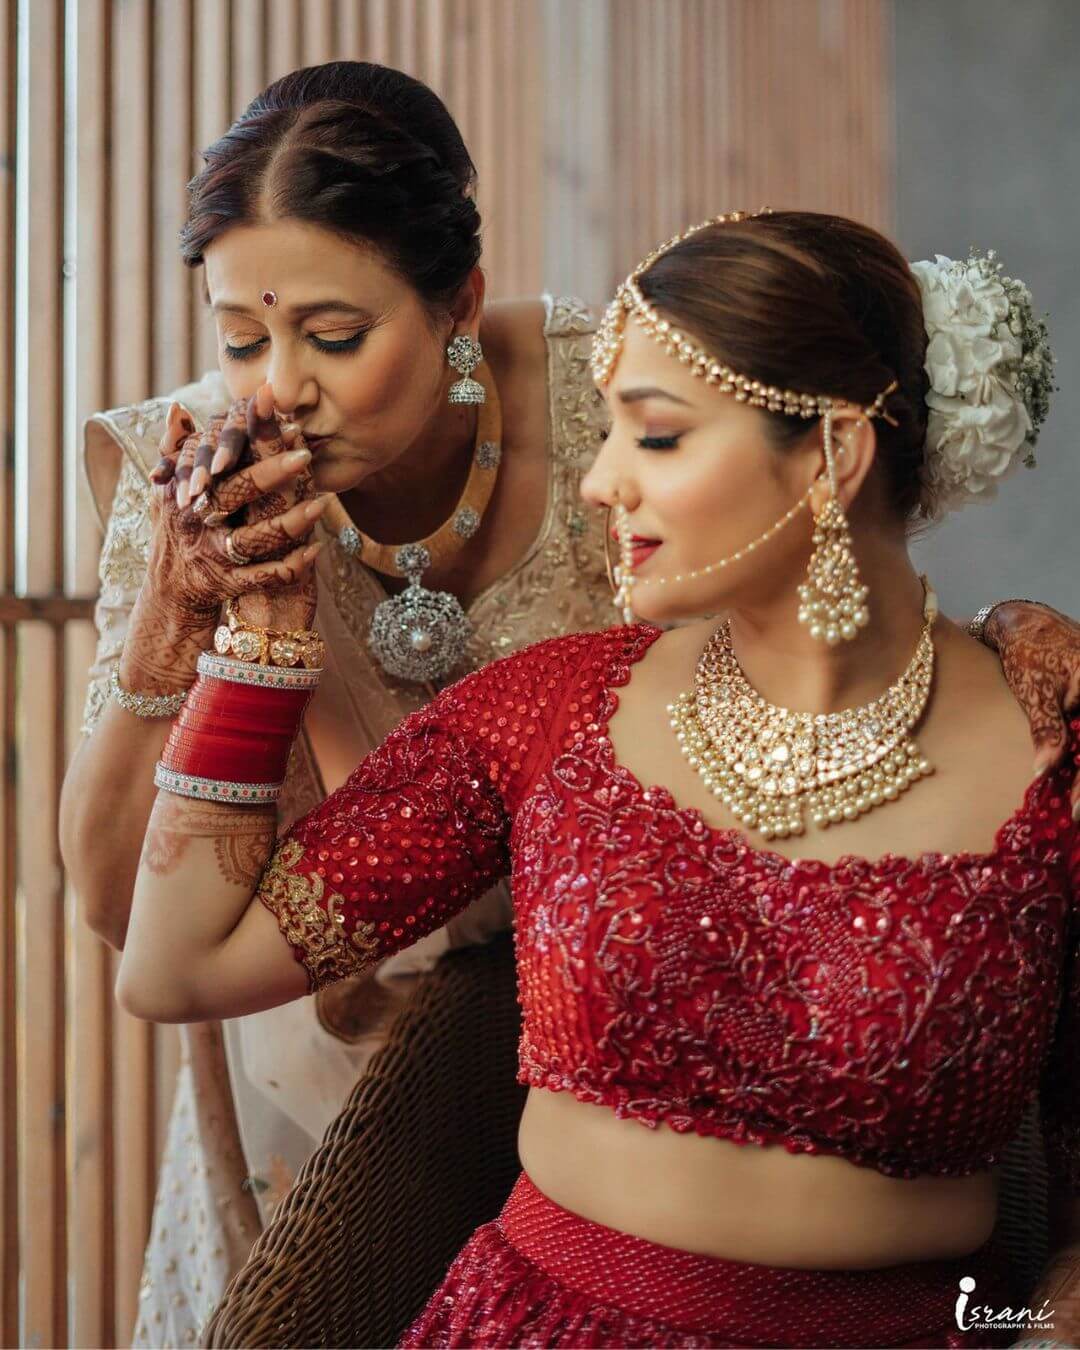 Kissing The Bride's Hand - A Mother-Daughter Pose